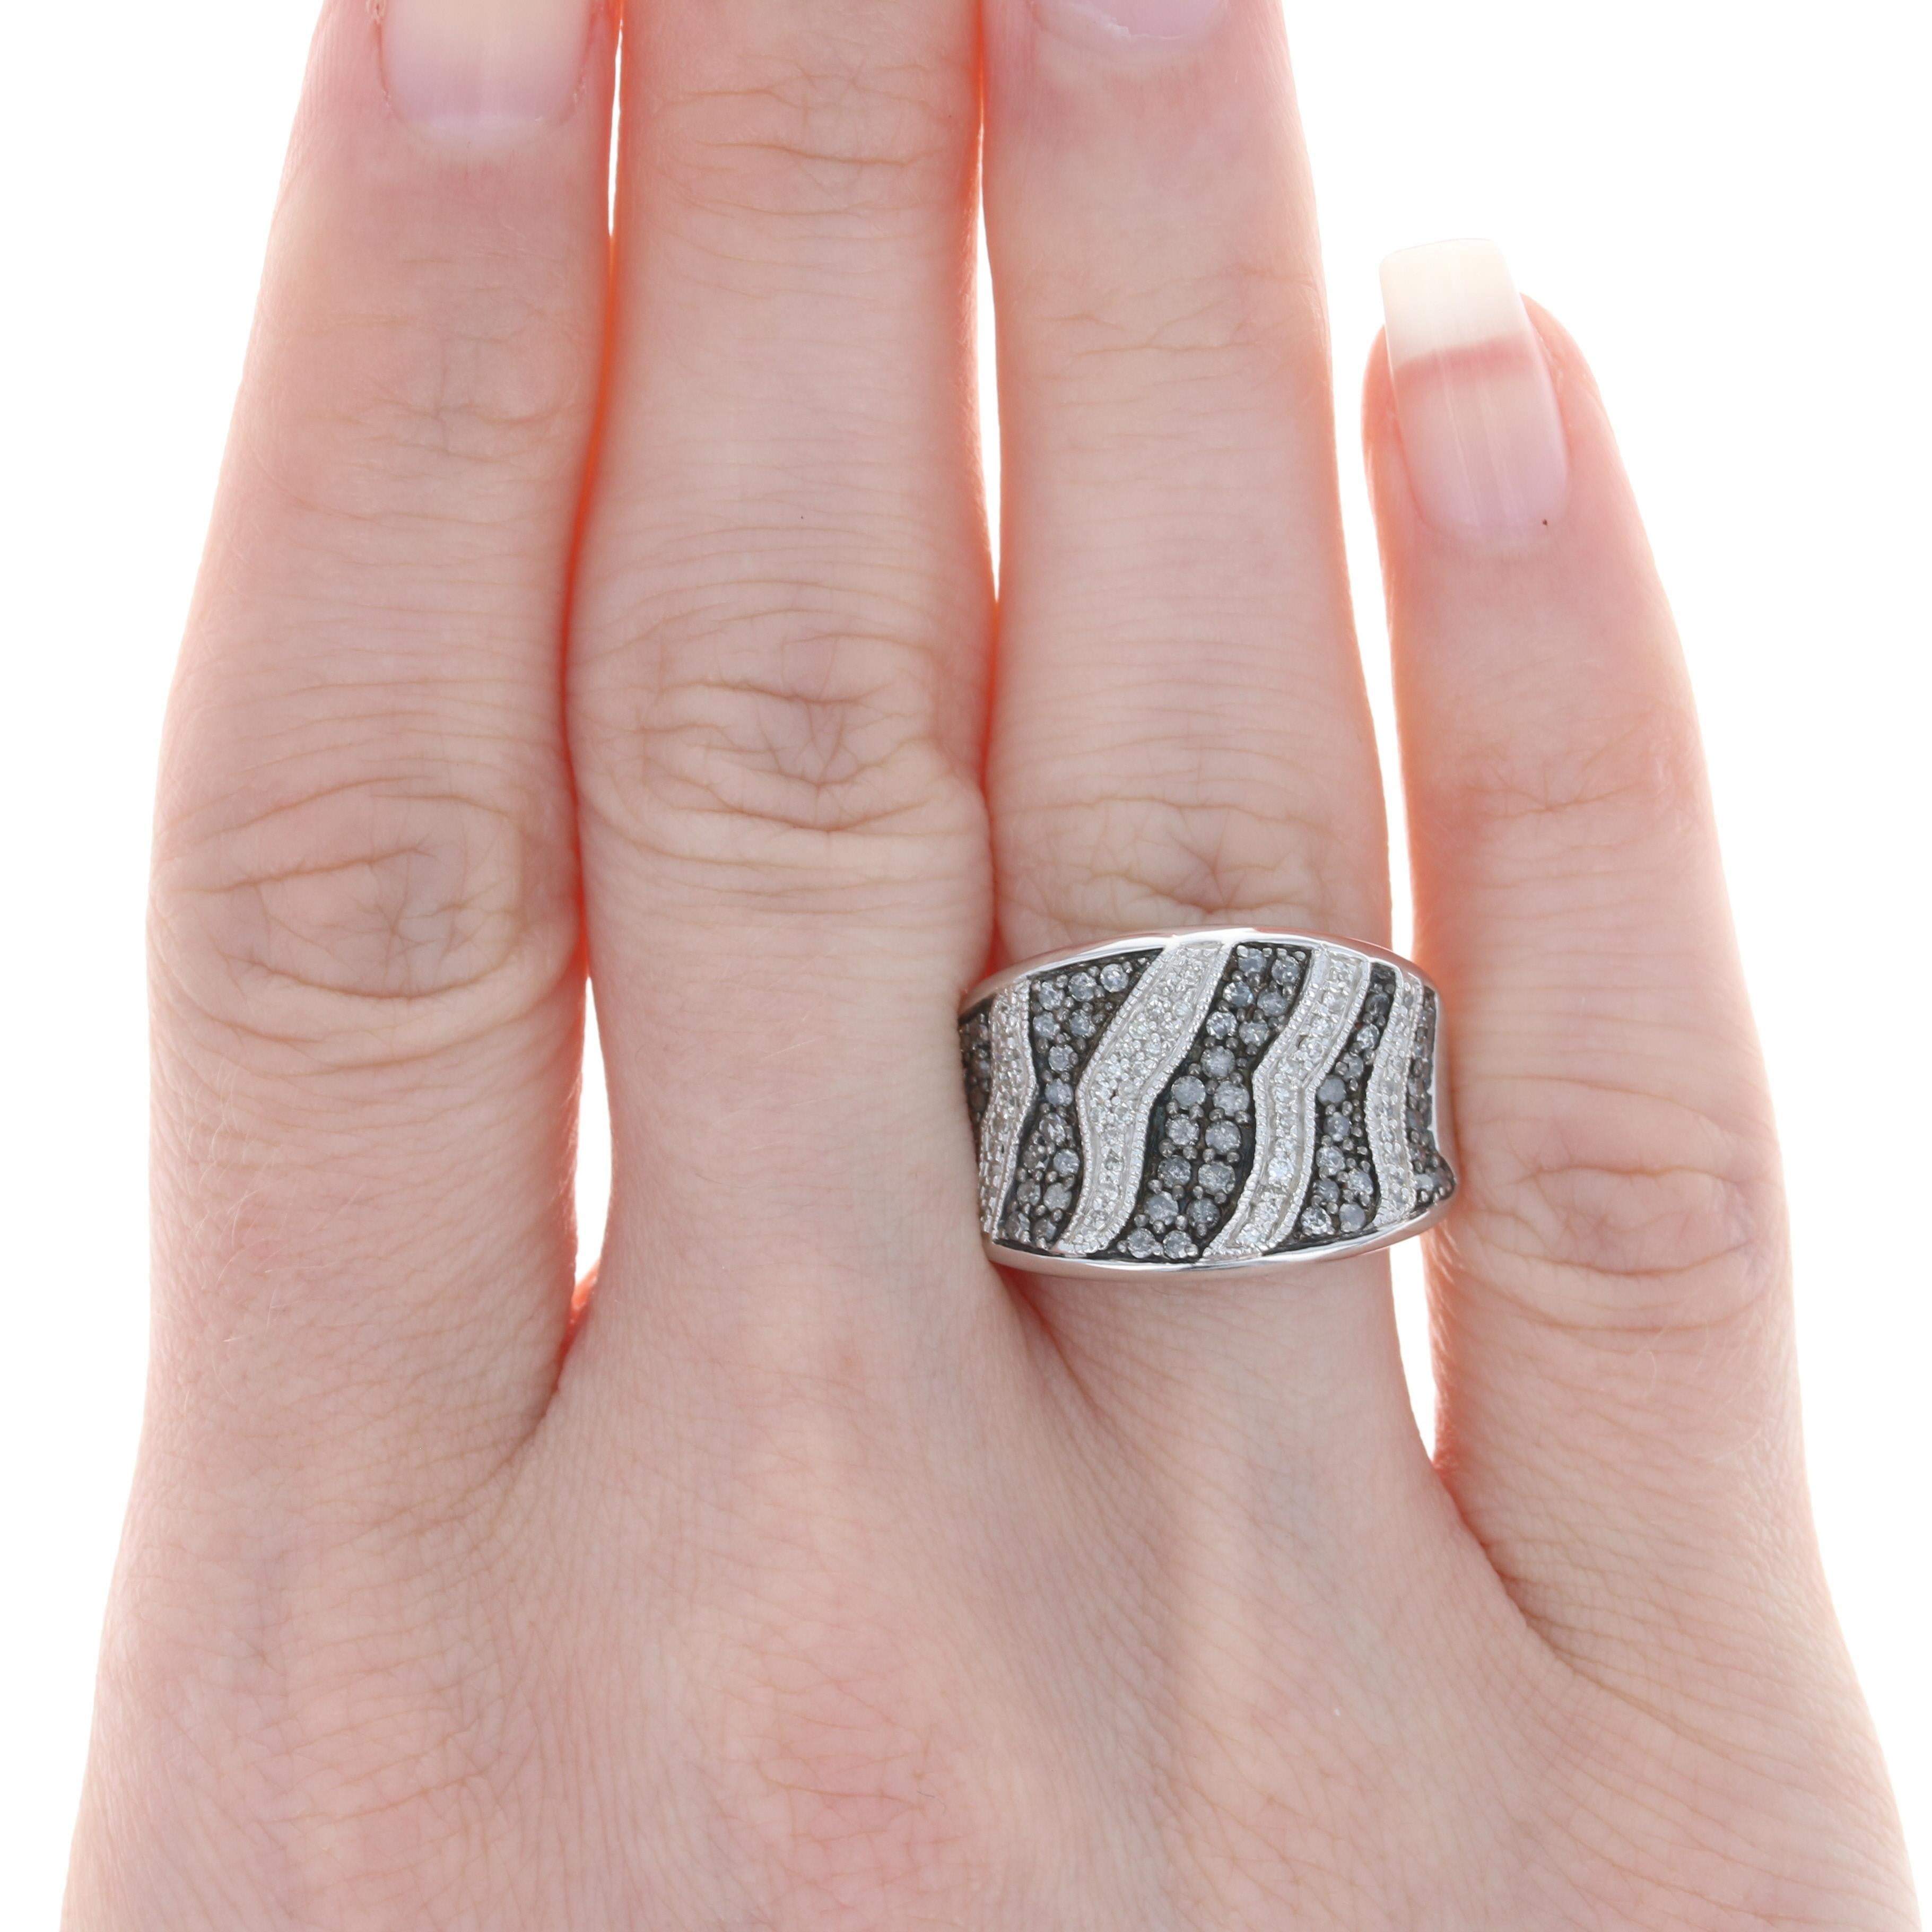 For Sale:  New Contoured Diamond Ring, Sterling Silver 6 3/4 Animal Print Pattern .78ctw 3